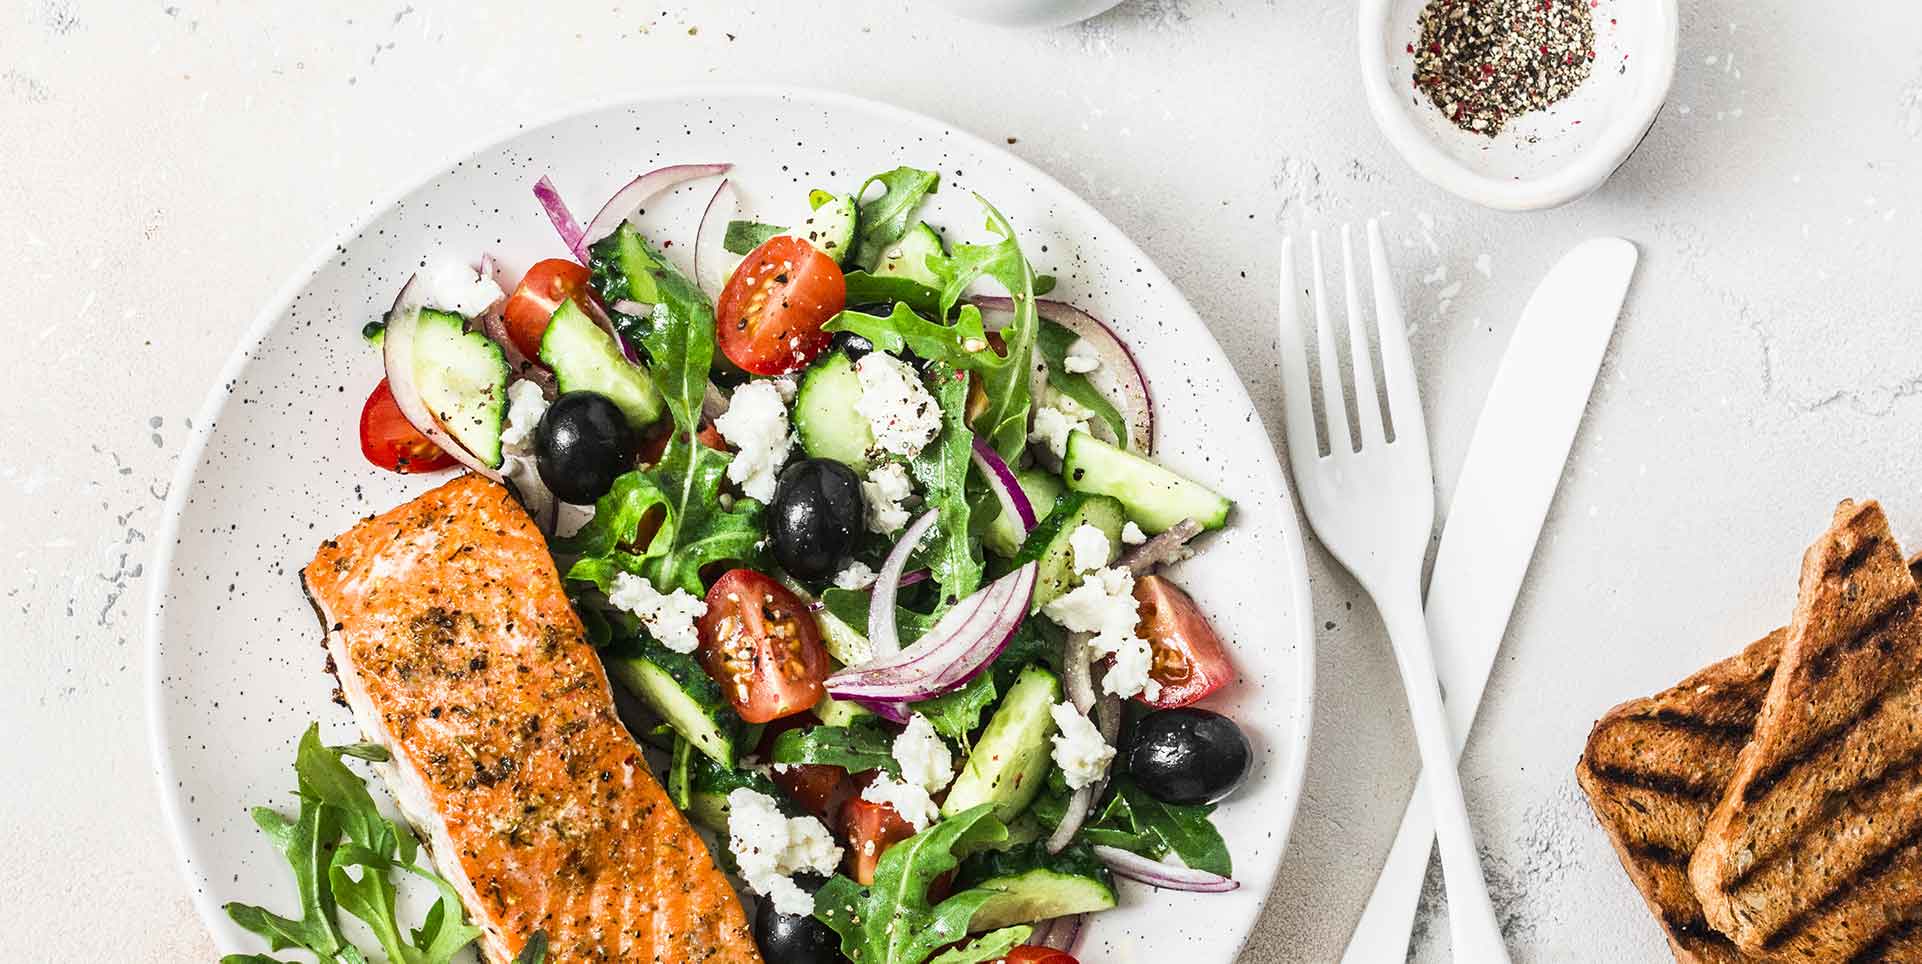 Salmon and Dark Leafy Greens plate